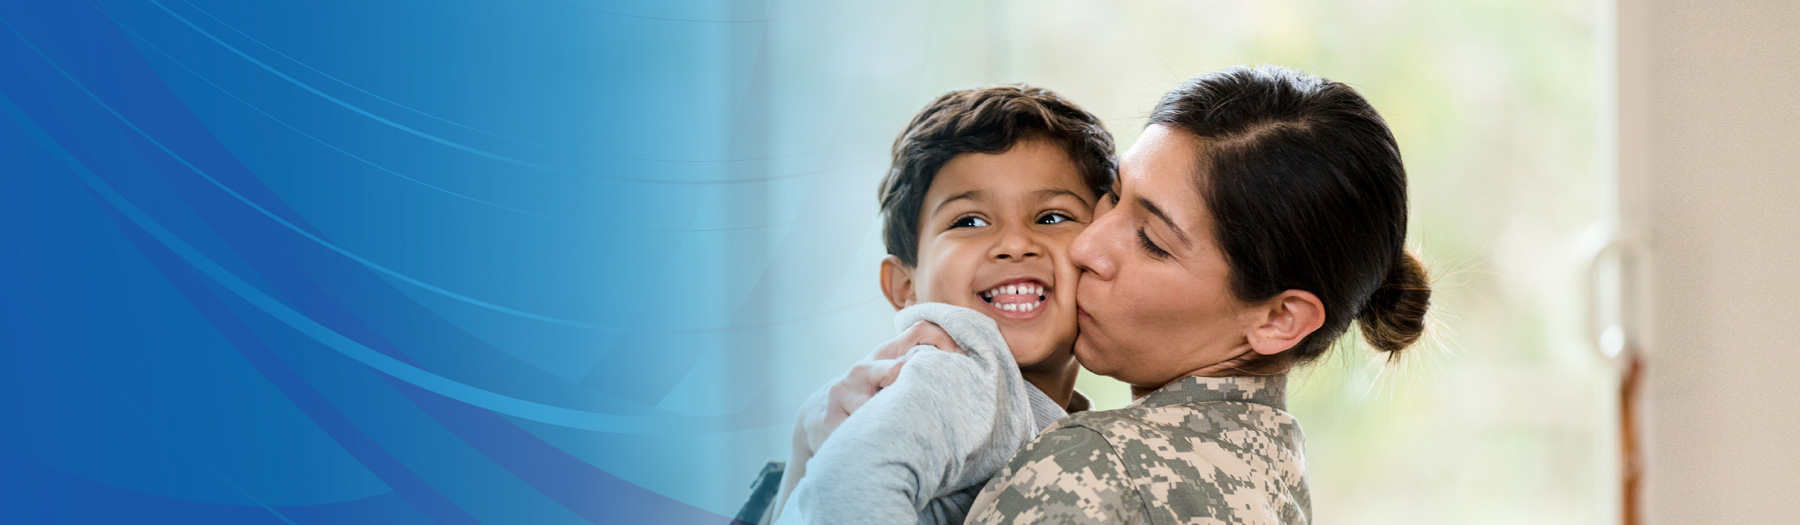 Mother wearing military camouflage hugs and kisses smiling young son